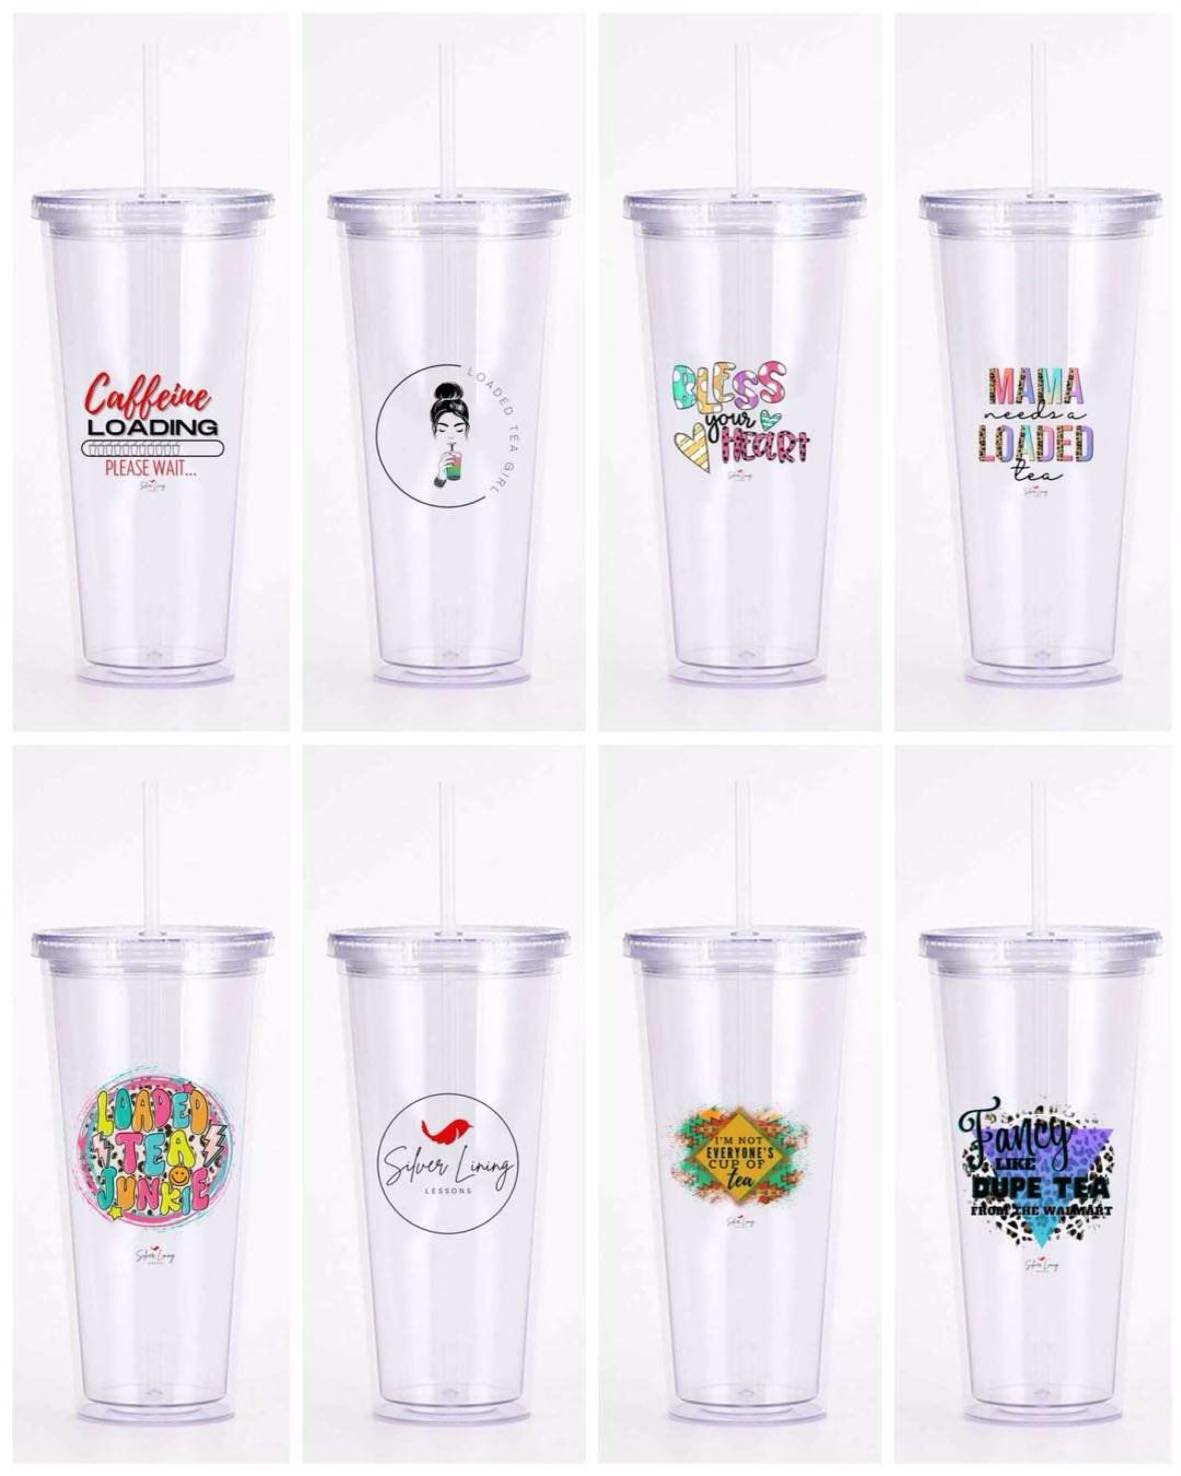 Fancy Like Dupe Tea From Walmart Tumbler *EXCLUSIVE SLL COLLECTION*